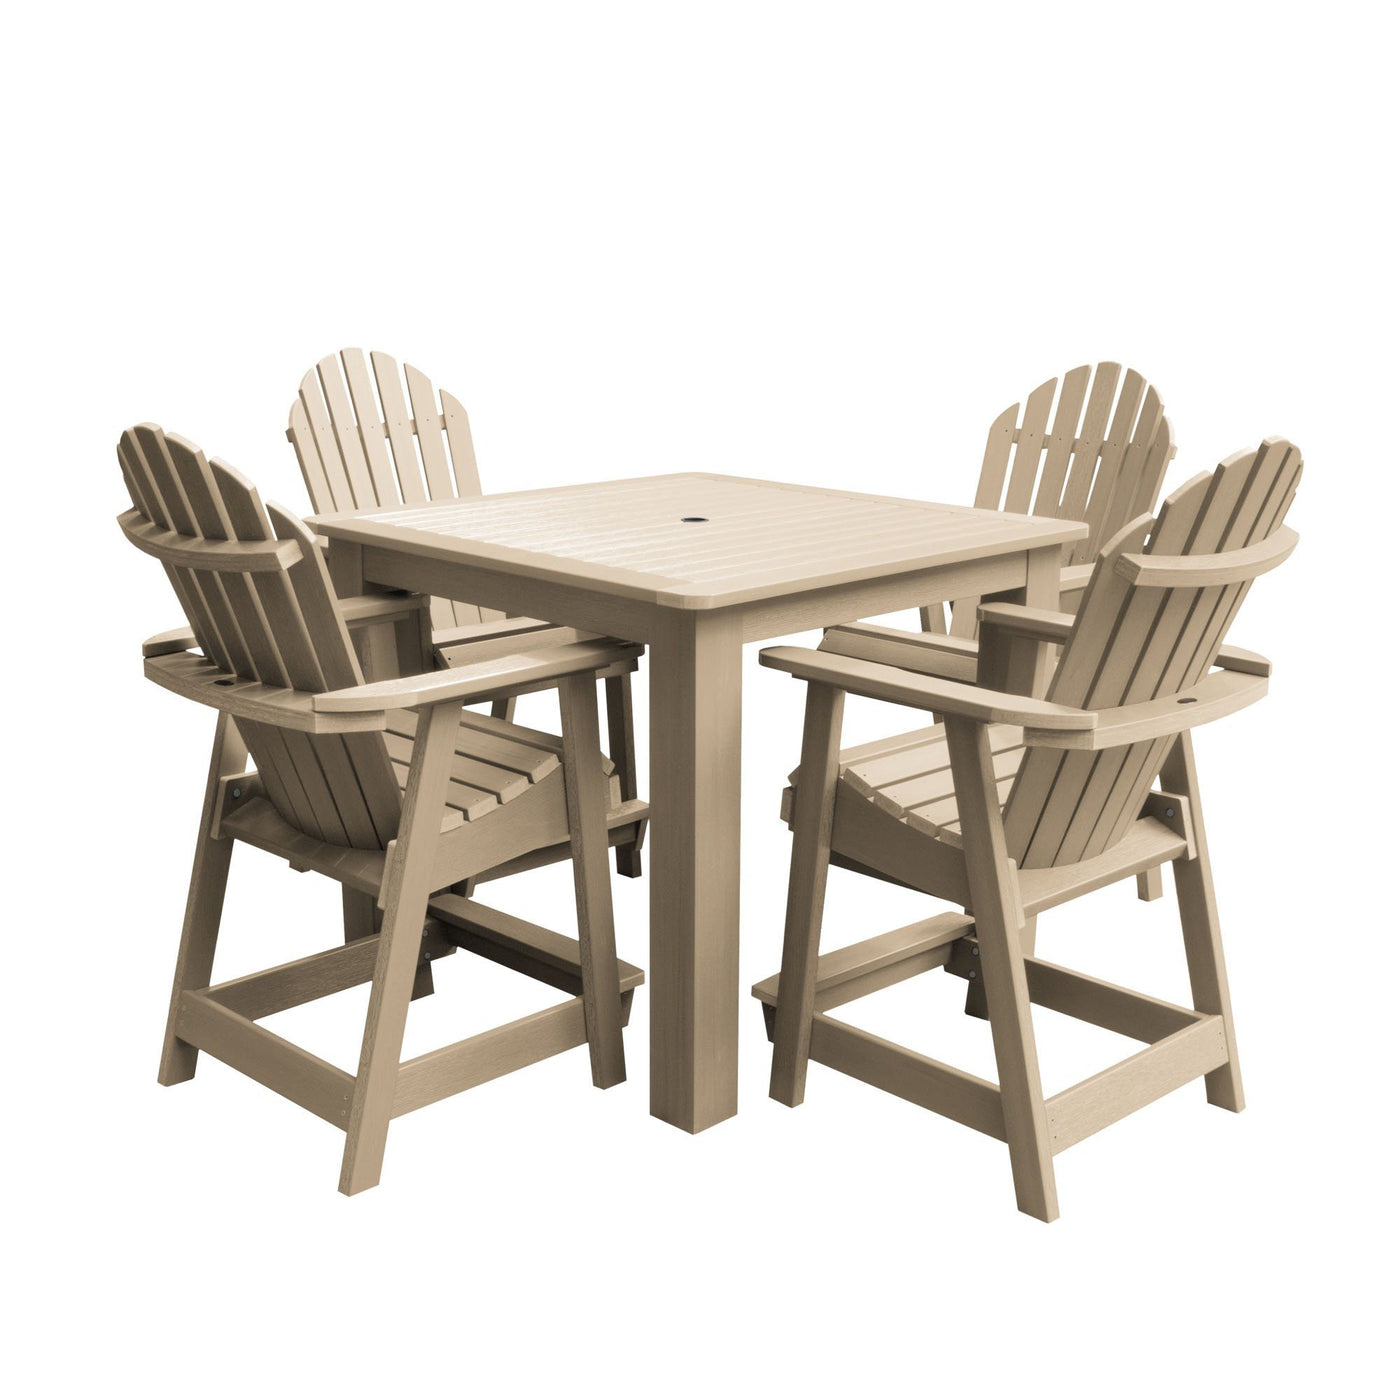 Hamilton 5pc Square Dining Set 42in x 42in - Counter Height Dining Highwood USA Tuscan Taupe 